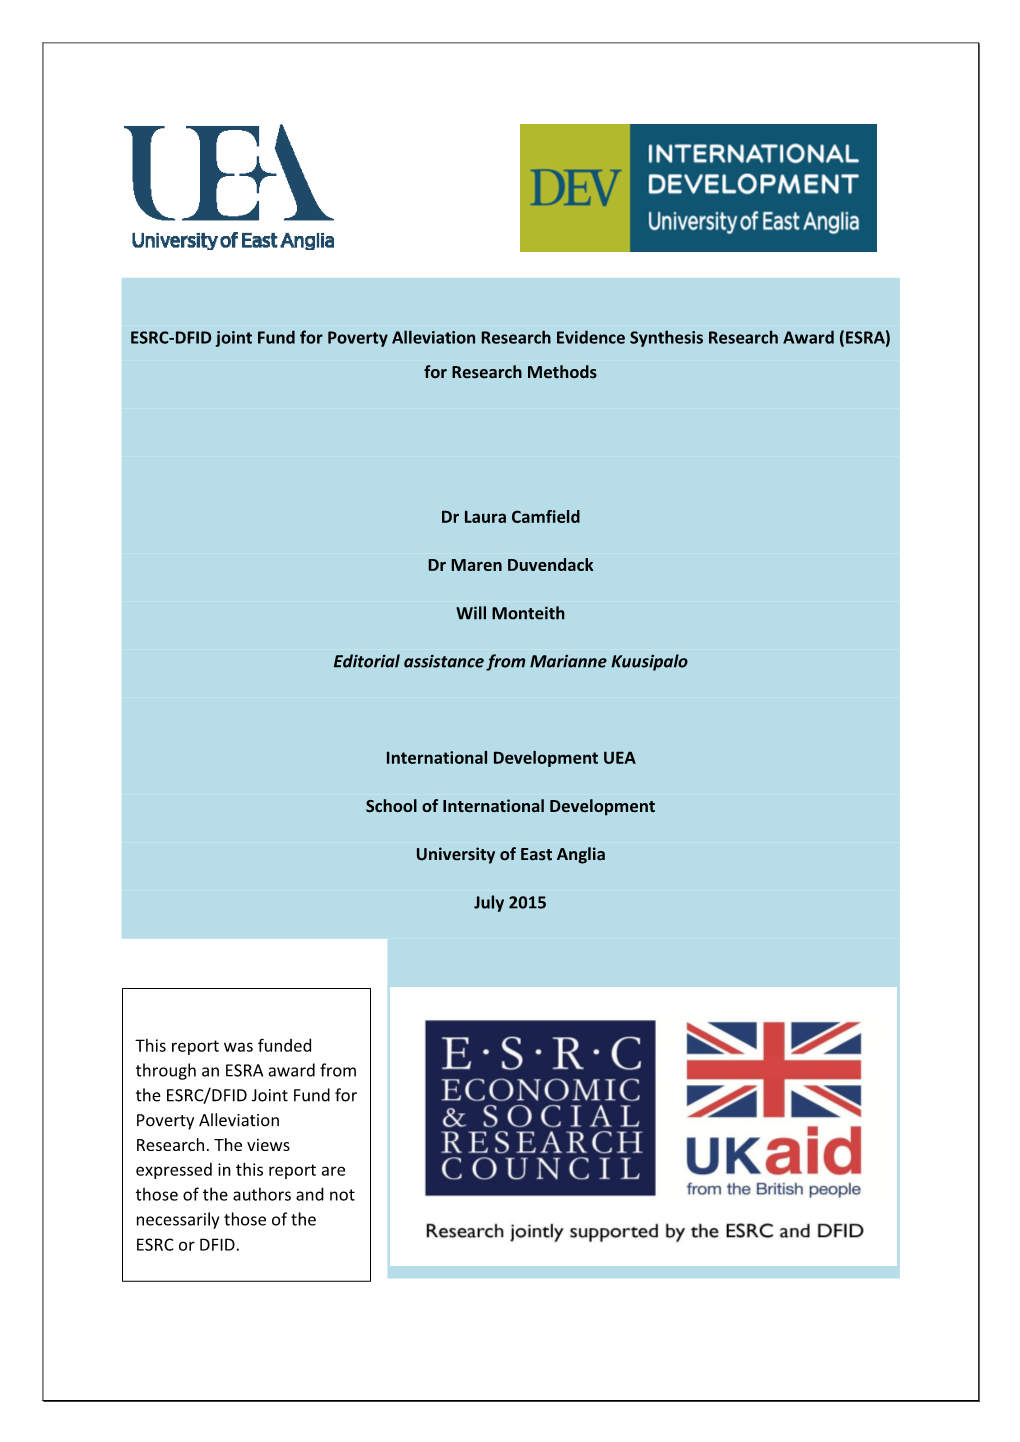 ESRC-DFID Joint Fund for Poverty Alleviation Research Evidence Synthesis Research Award (ESRA) for Research Methods